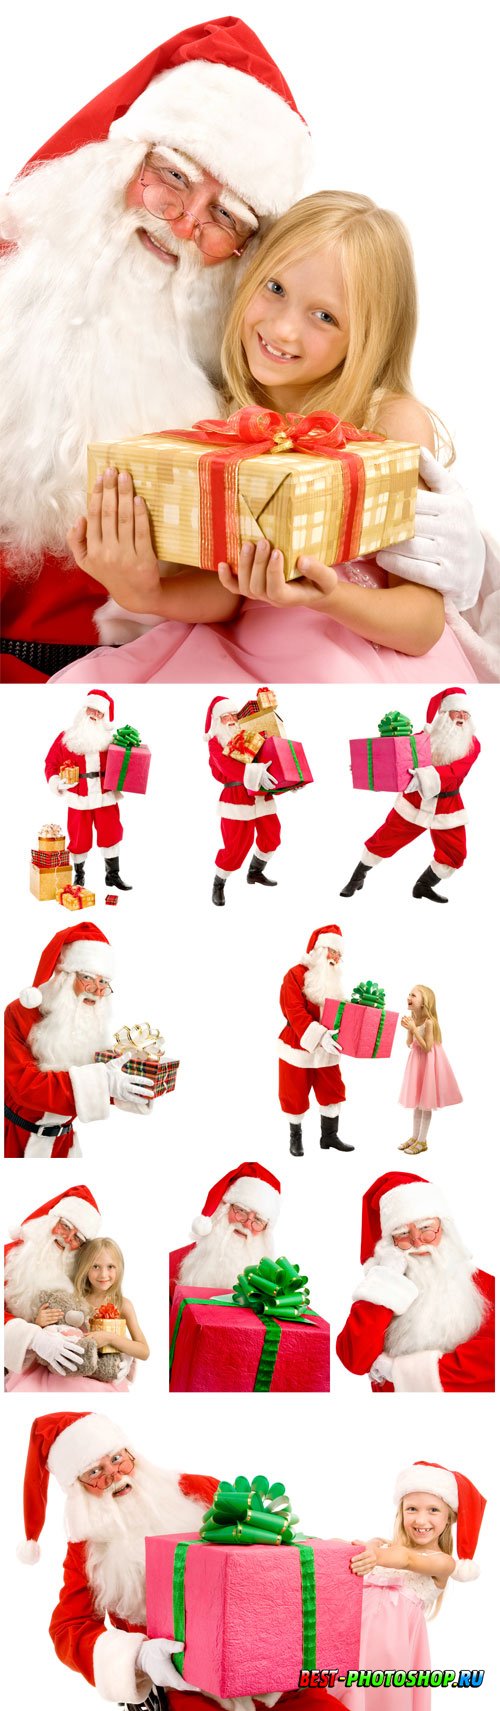 New Year and Christmas stock photos 33